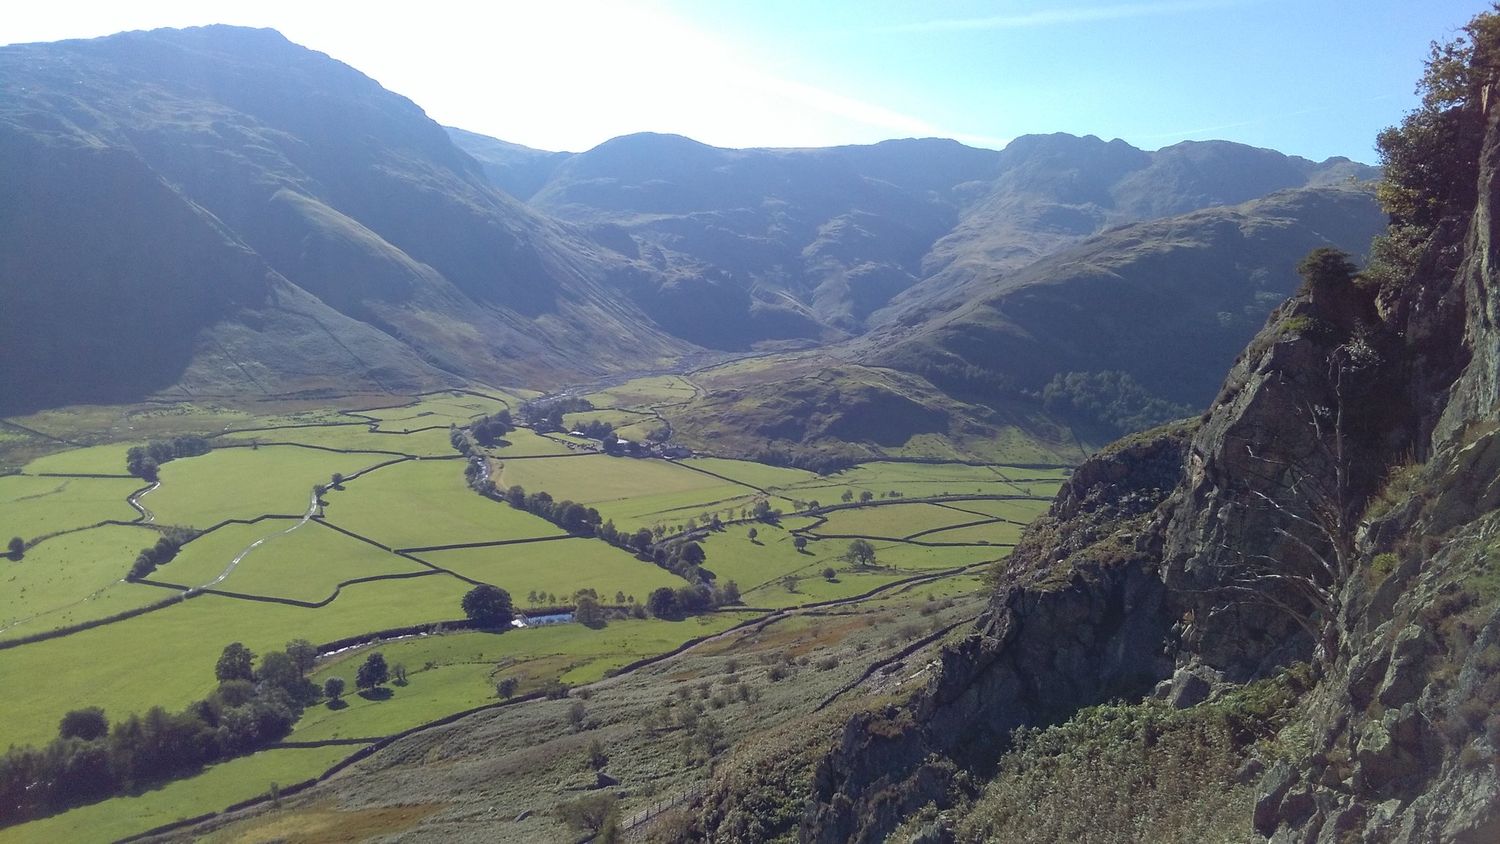  Classic Lakeland Mountains: the Langdale valley and Crinkle Crags - Chris Ensoll Mountain Guide 